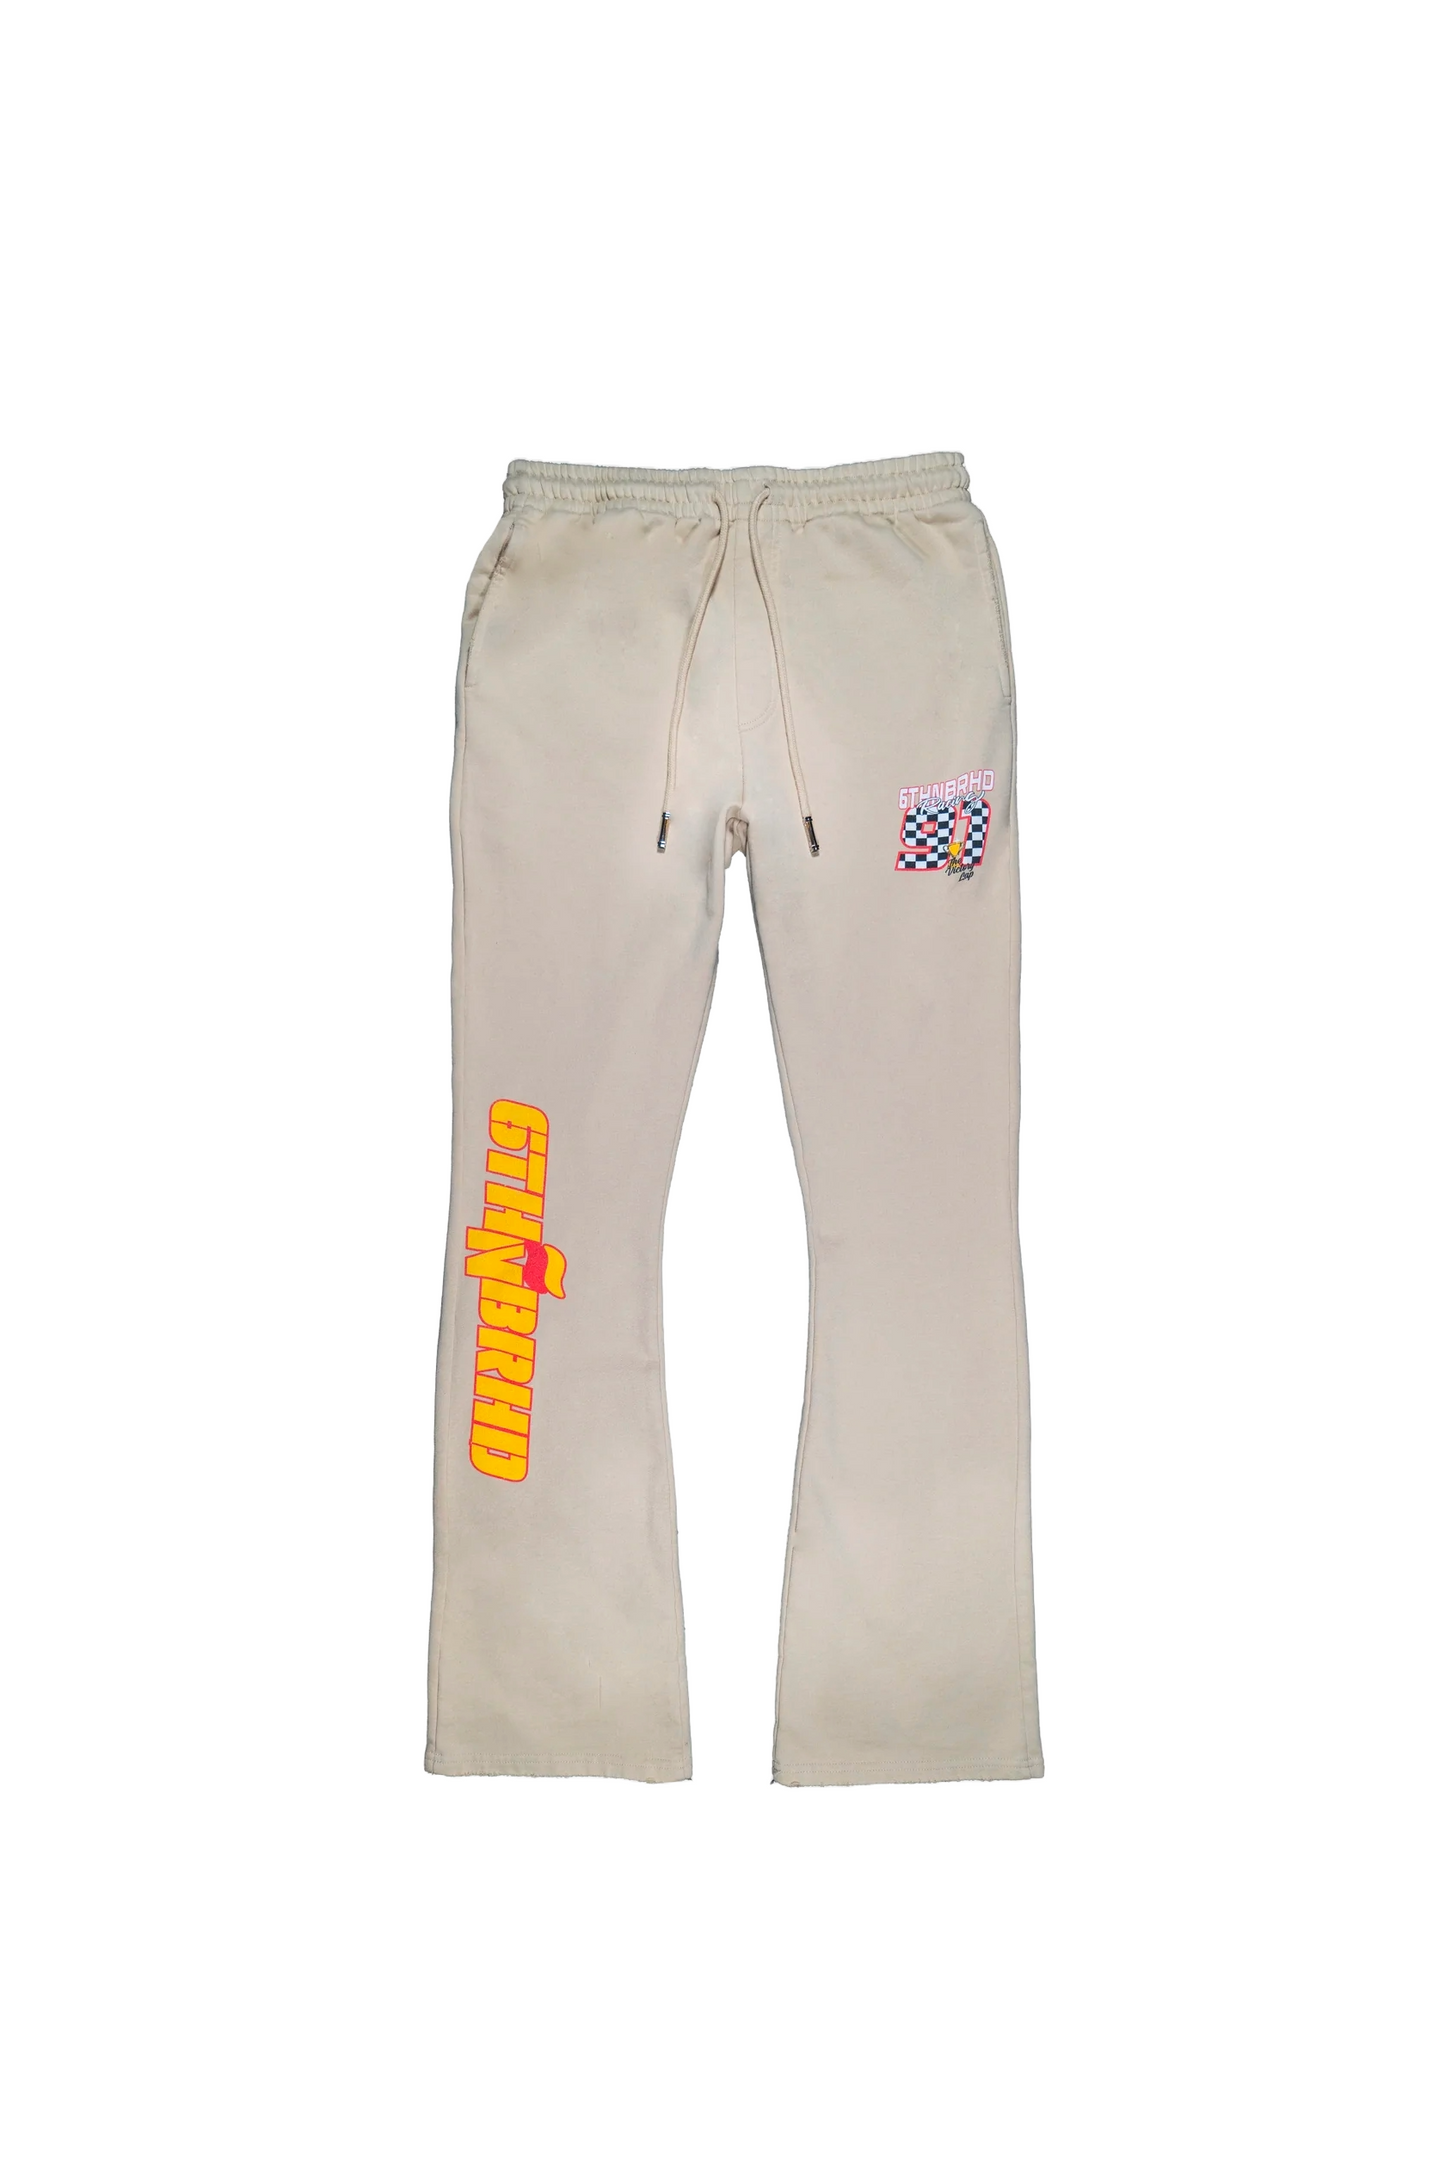 6TH NBRHD  "PIT STOP" STACKED PANTS